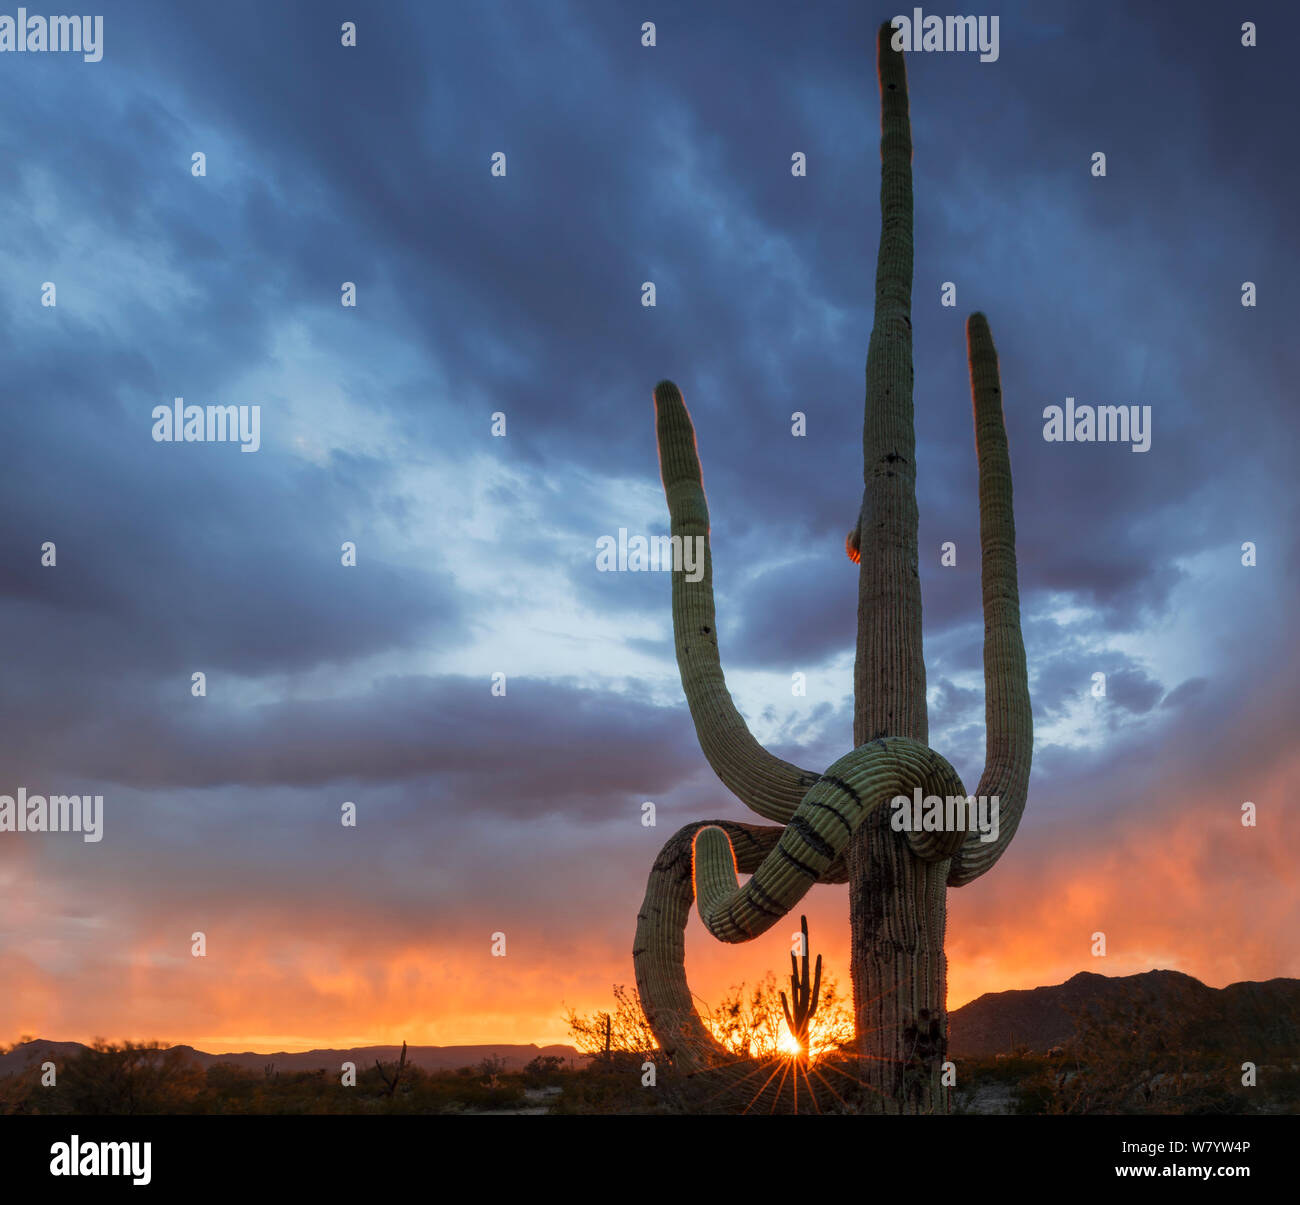 Saguaro cactus (Carnegiea gigantea) at sunset, with drooping frost damaged limbs, South Maricopa Mountains Wilderness, Sonoran Desert National Monument, Arizona, USA, March. Stock Photo